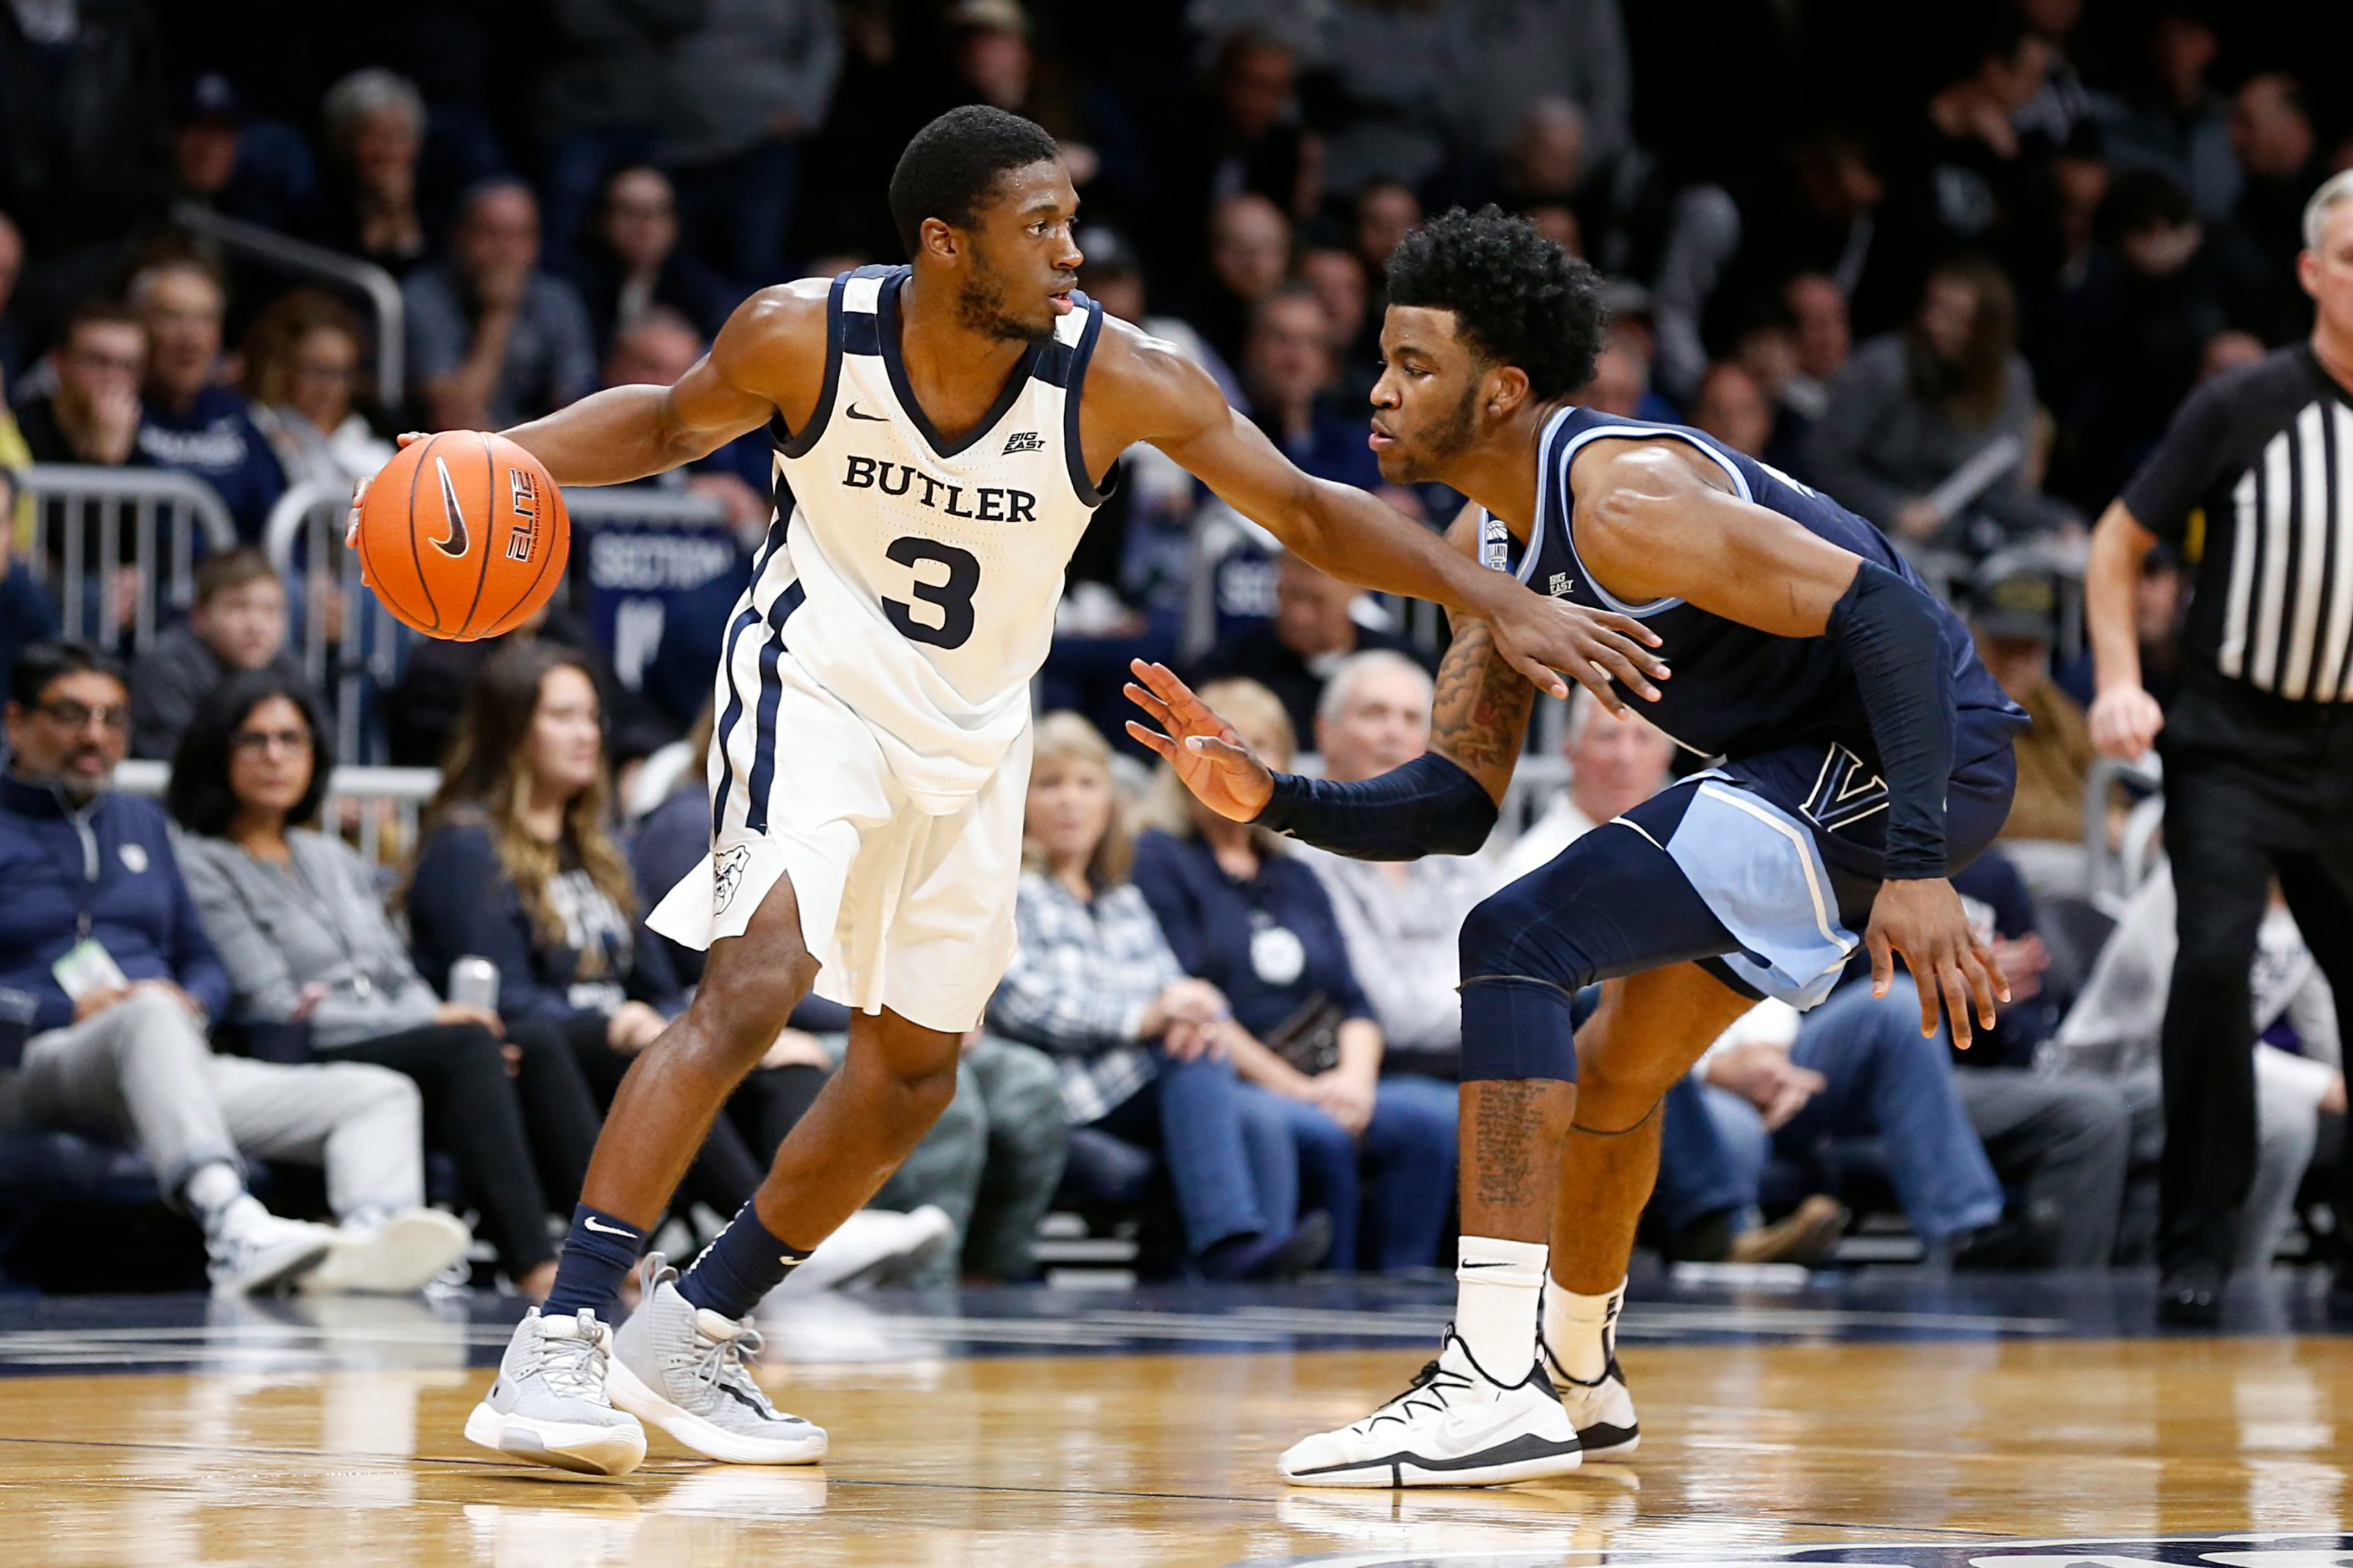 Big East Basketball Projecting the 201920 allconference teams